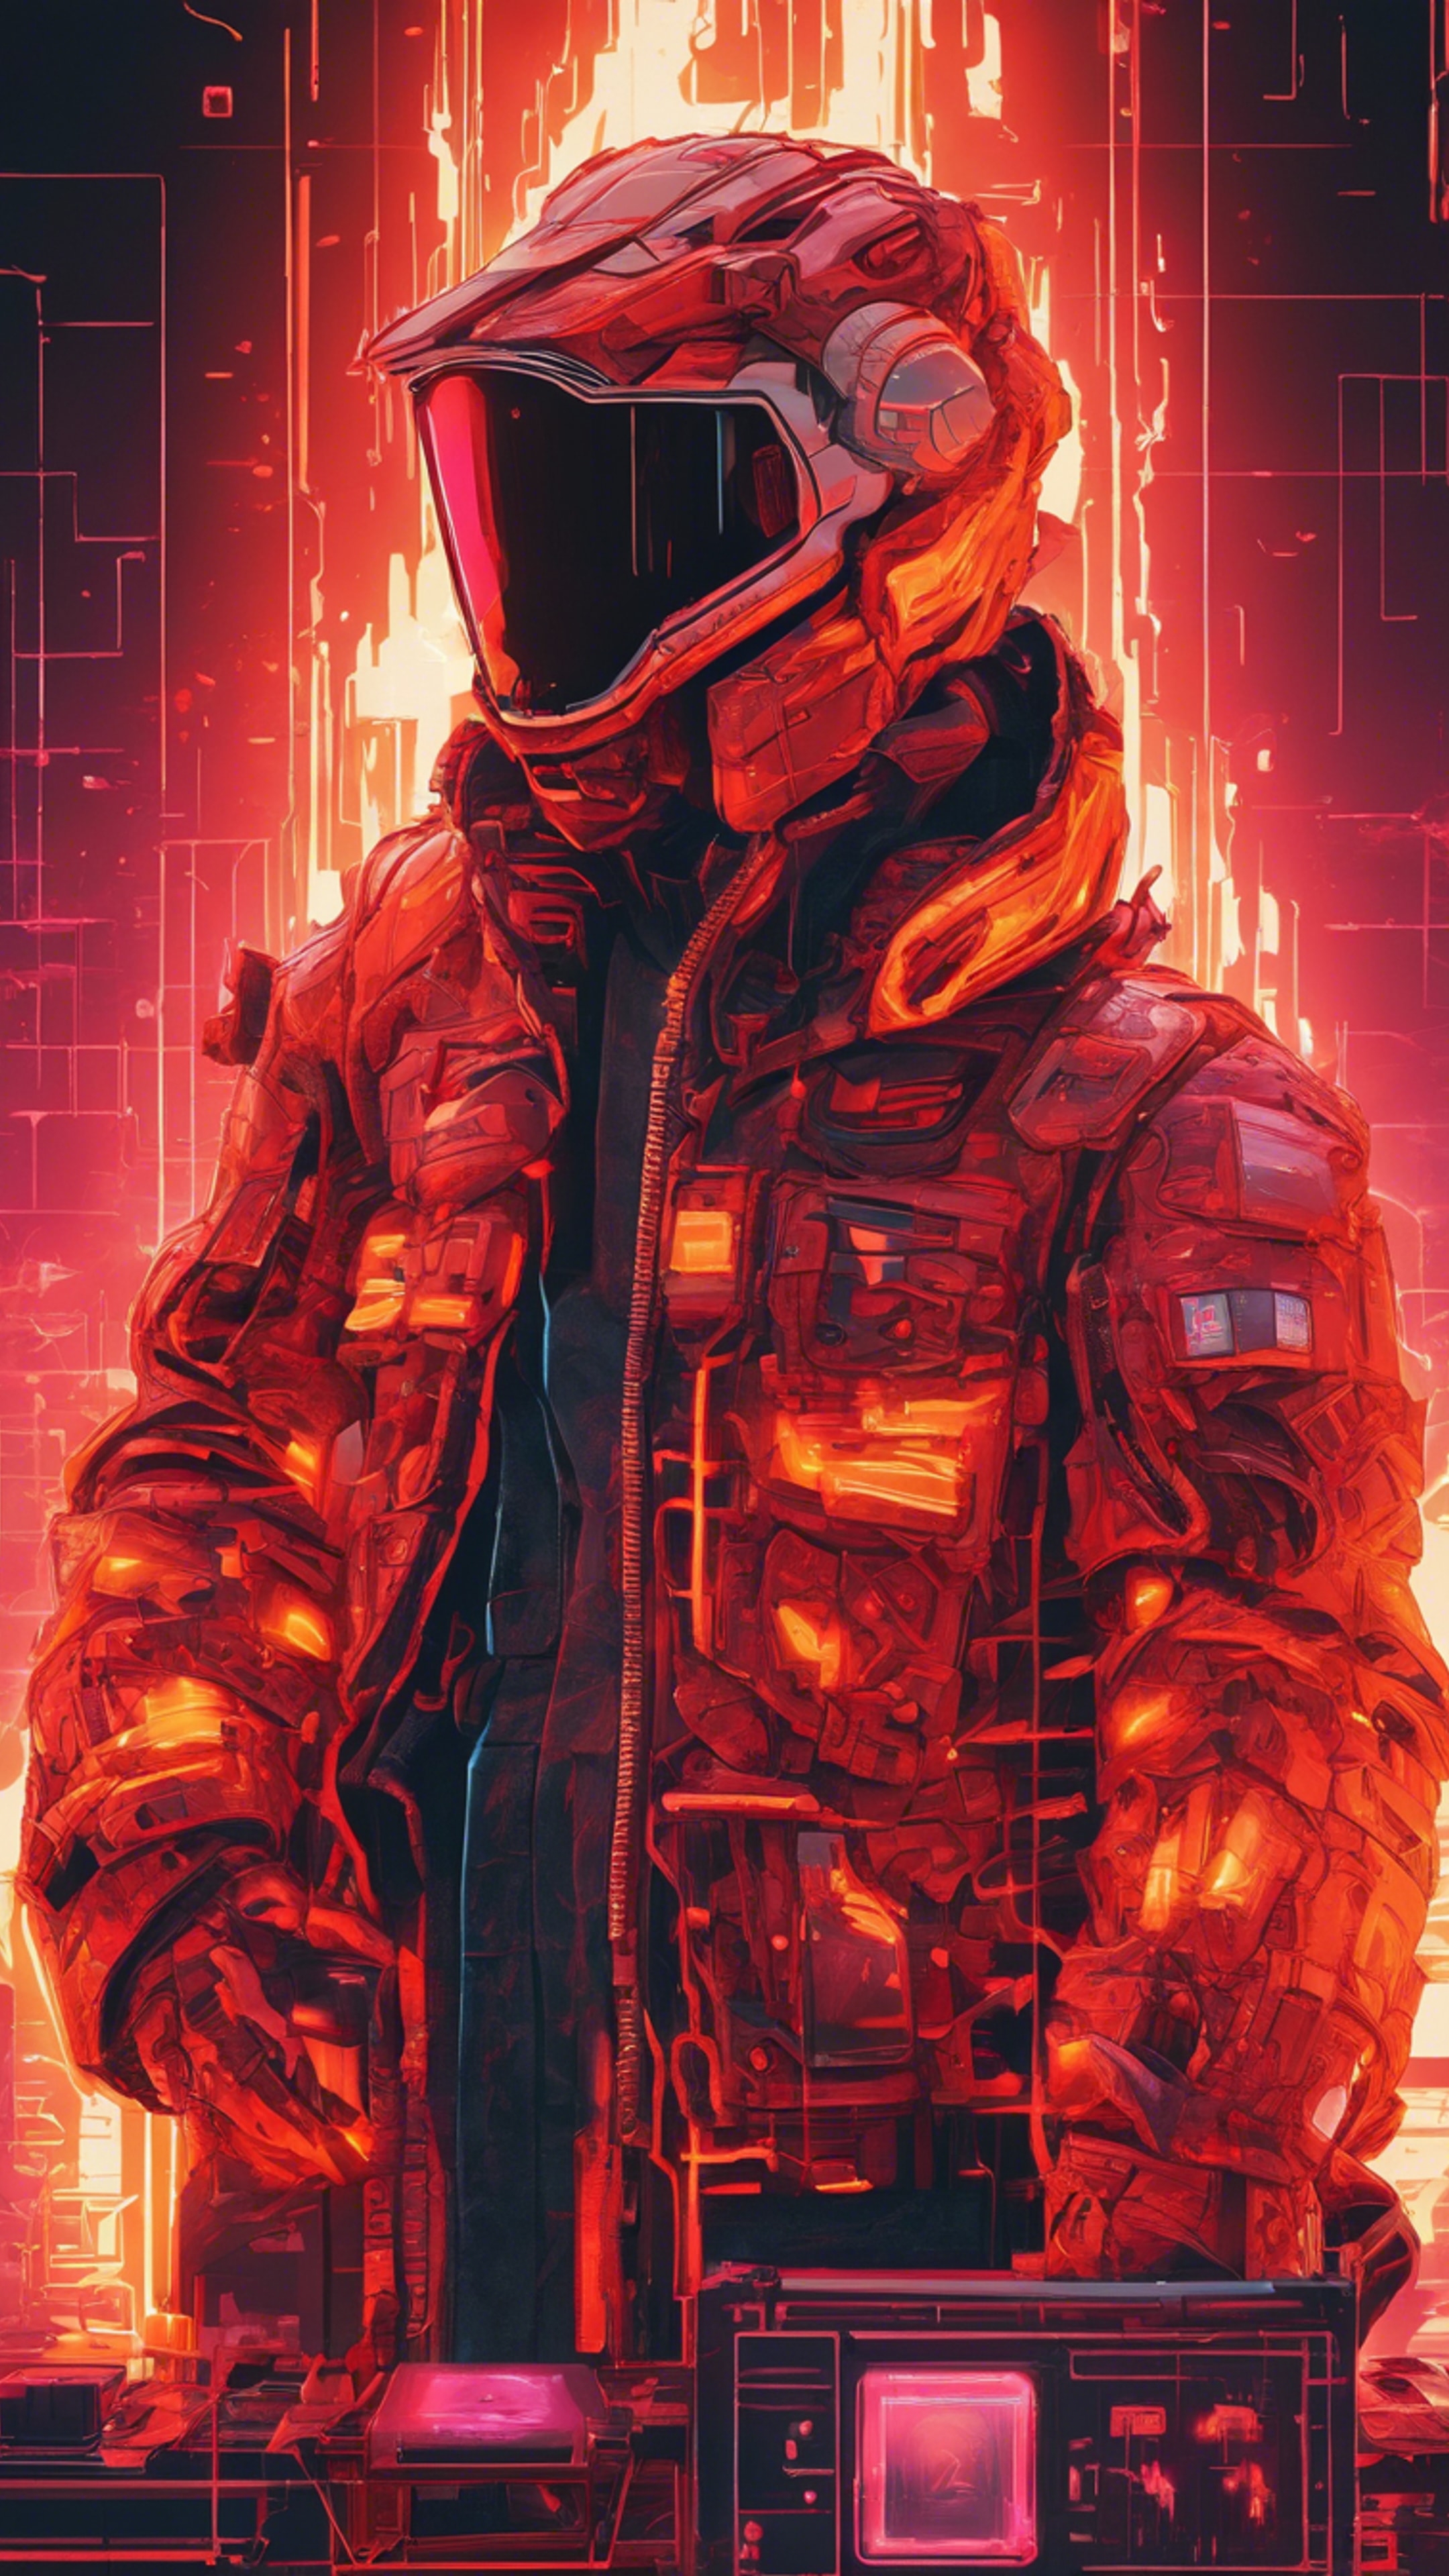 A stunning artwork of red and orange pixelated fire representing the fierce passion of gaming. Tapeta[8d5607d360bb44738828]